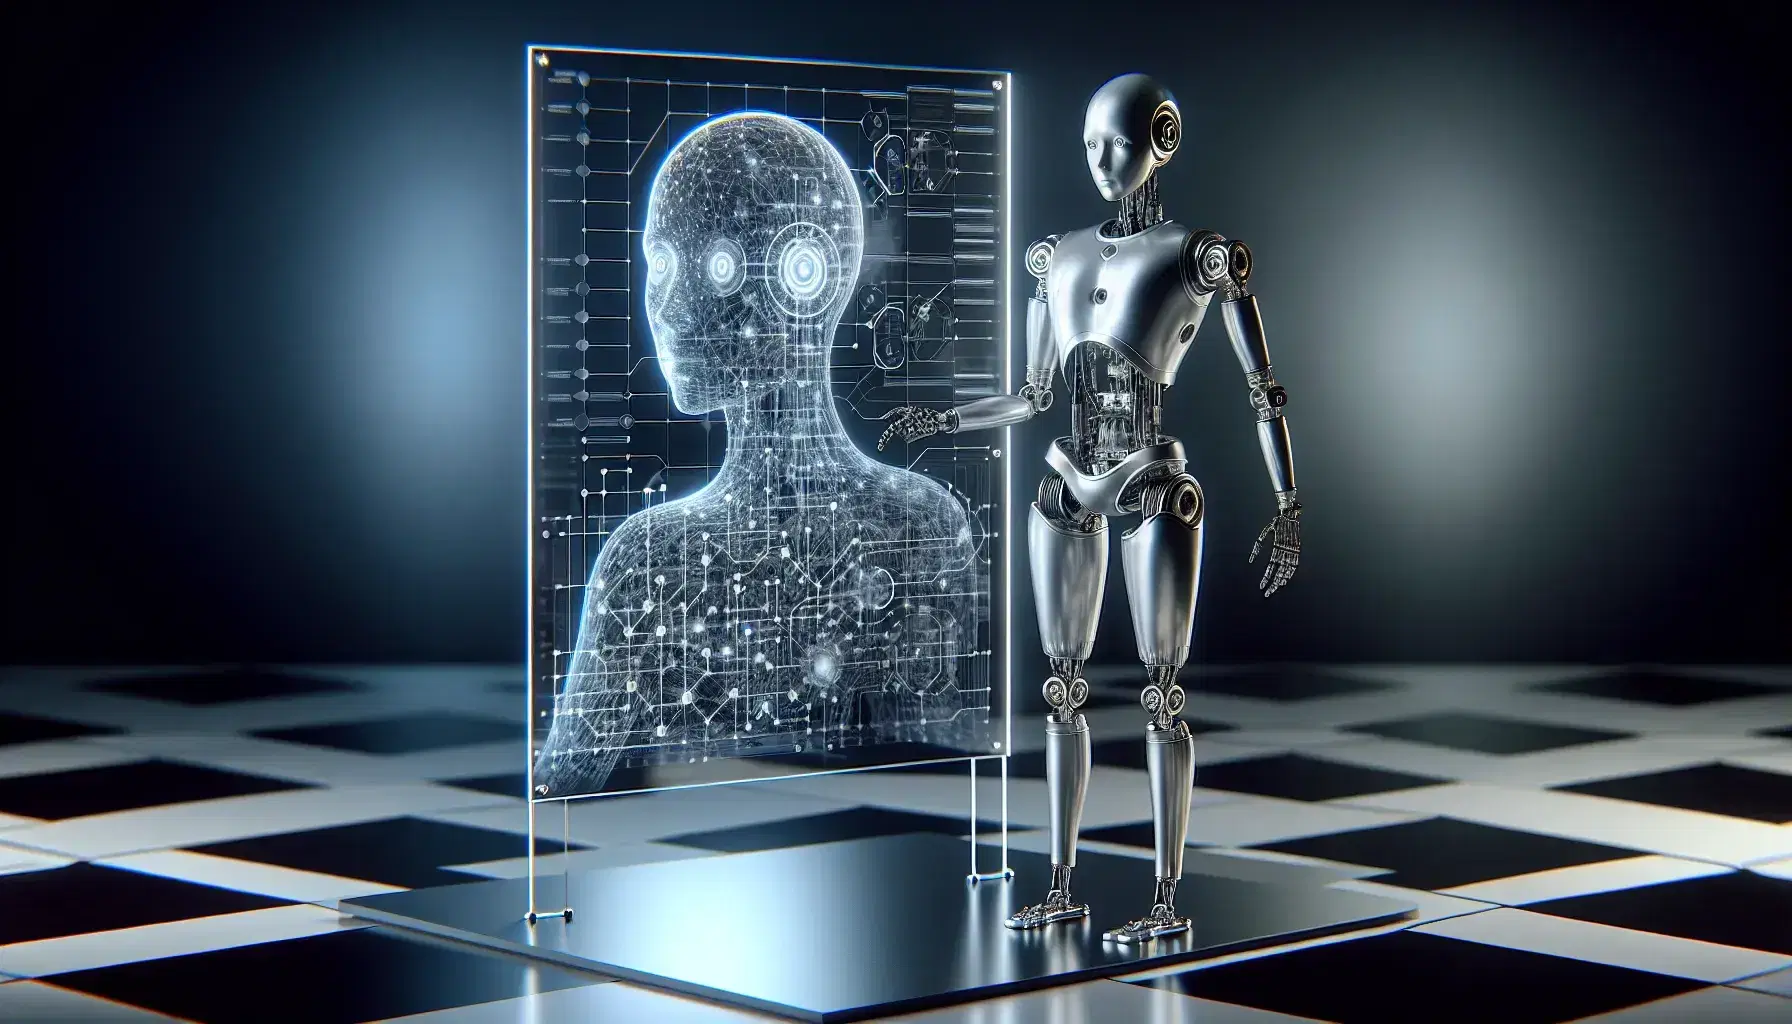 Shiny metal humanoid robot touches with his finger a luminous node on a transparent glass board with circuit board, on a checkerboard floor.